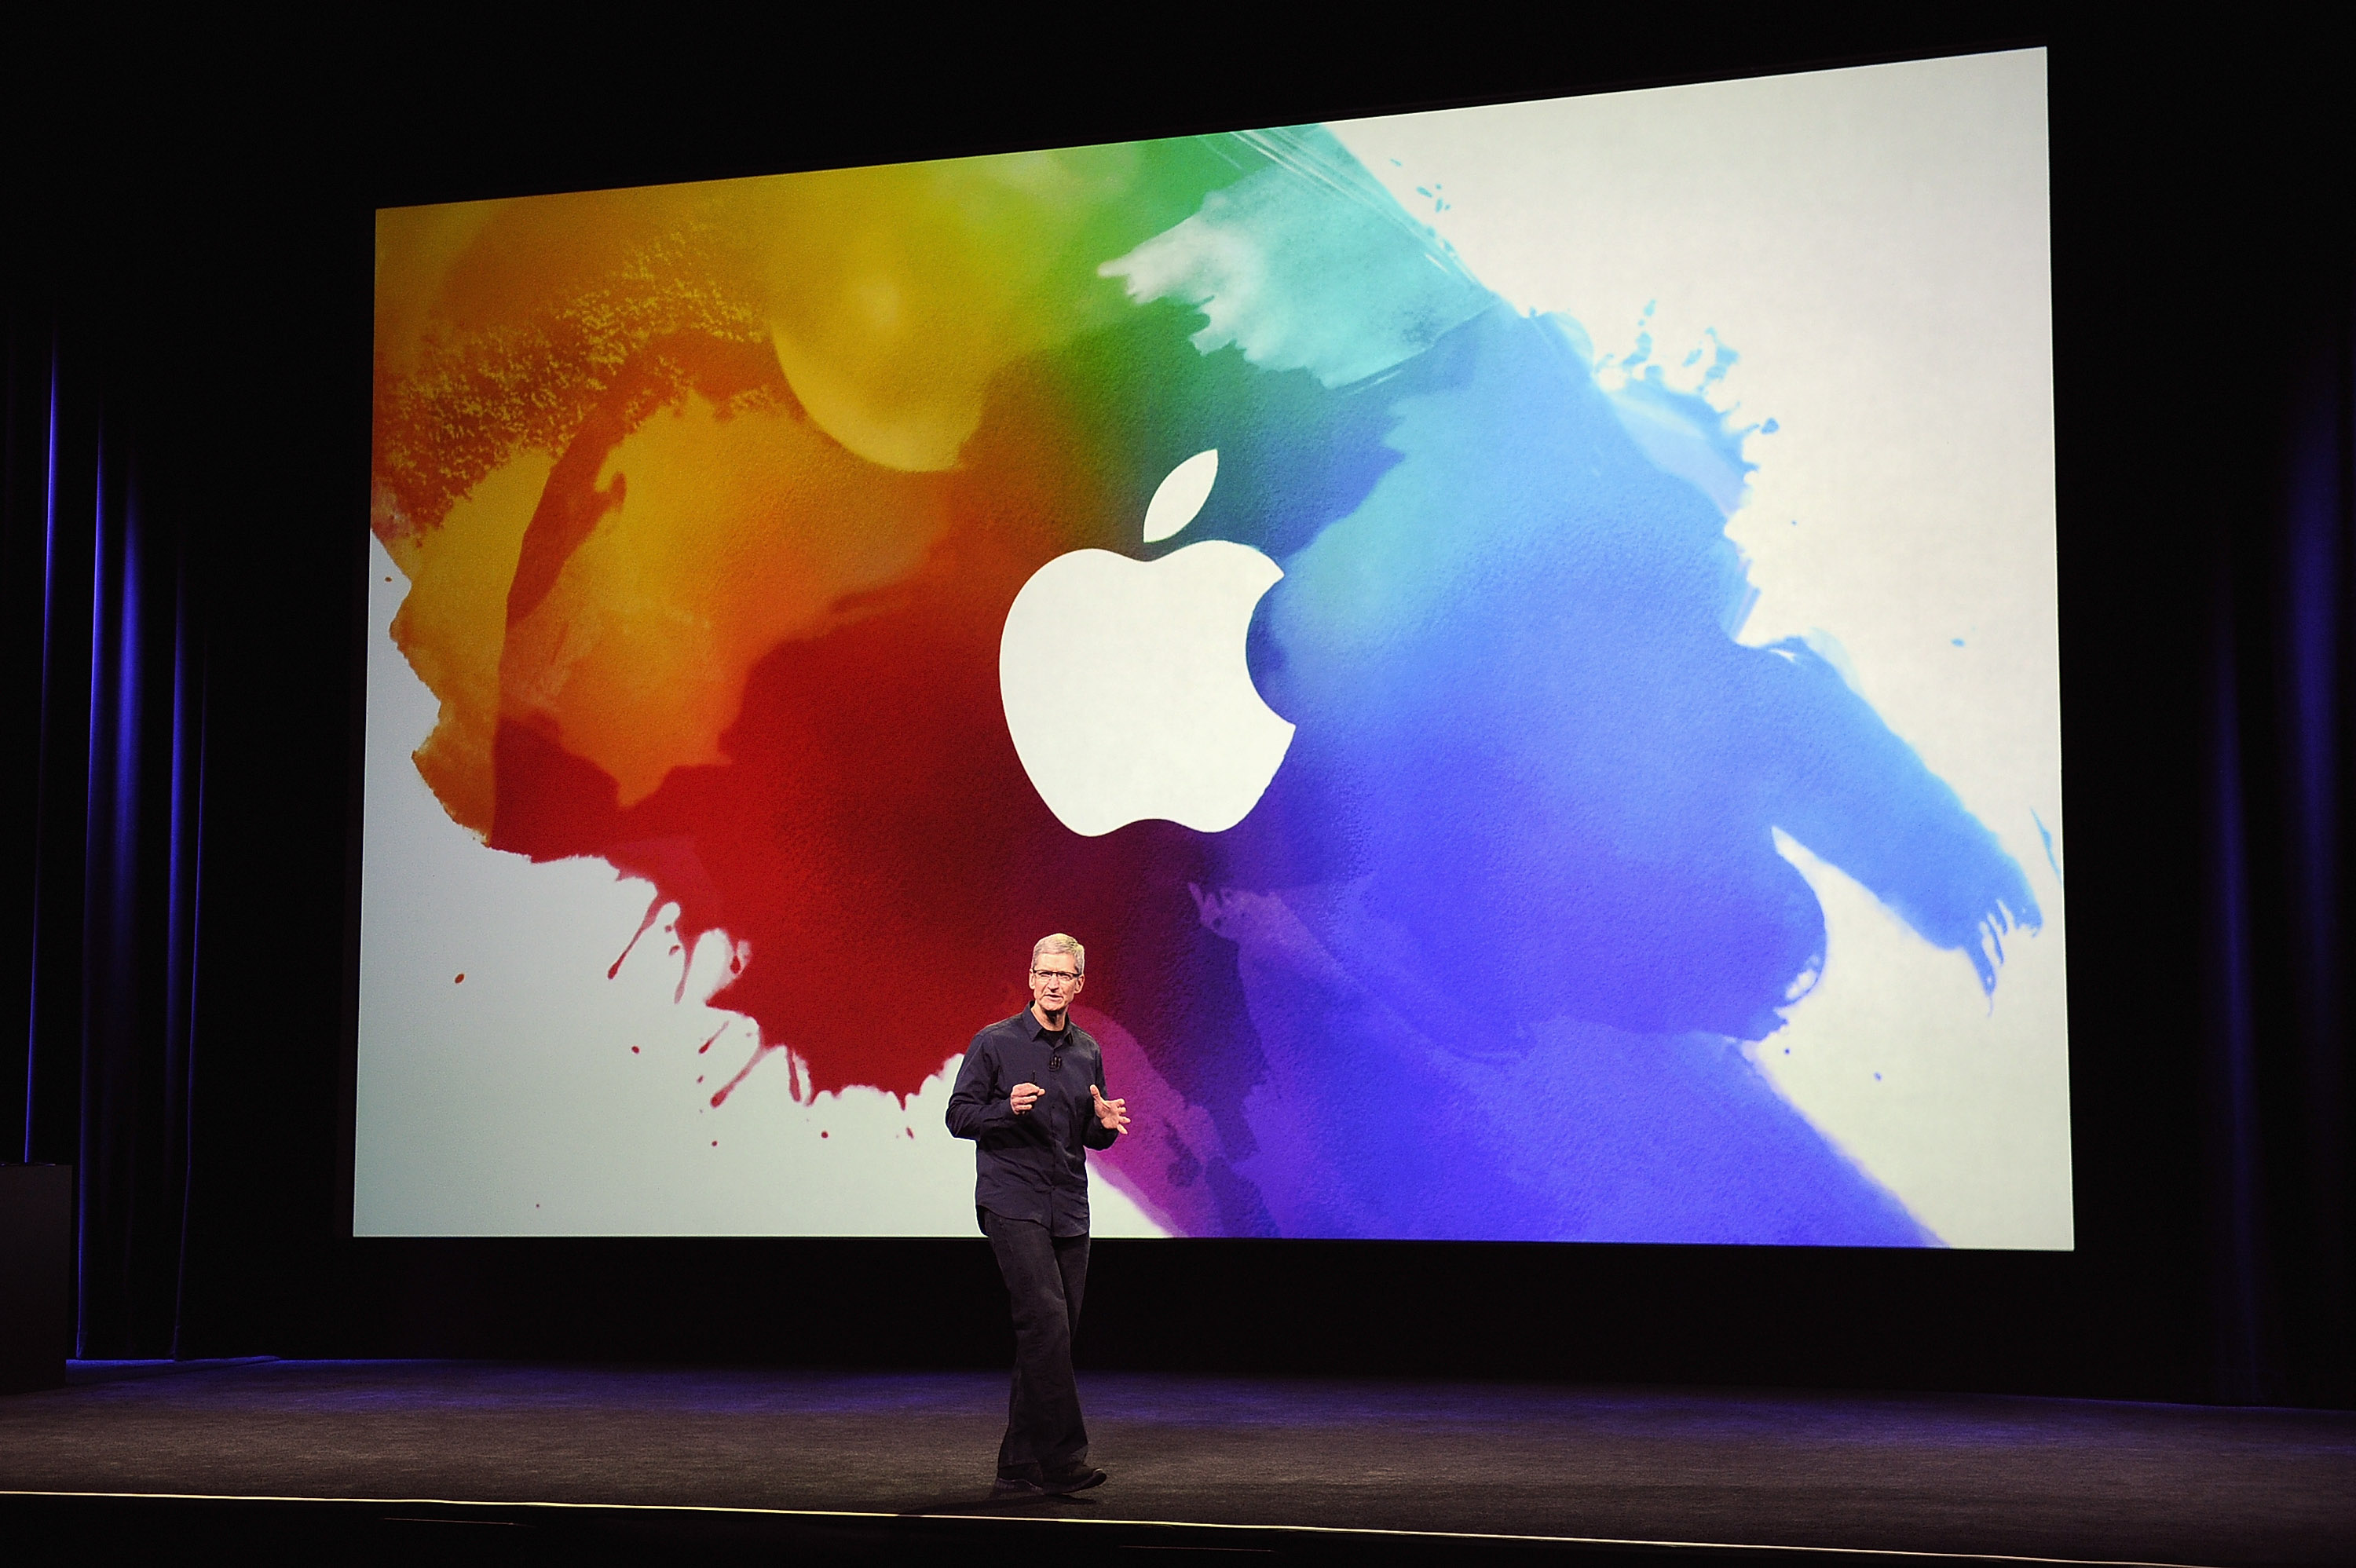 Sneak Peeks of the Next Apple Event New iPhone and iPad Mr. APPs